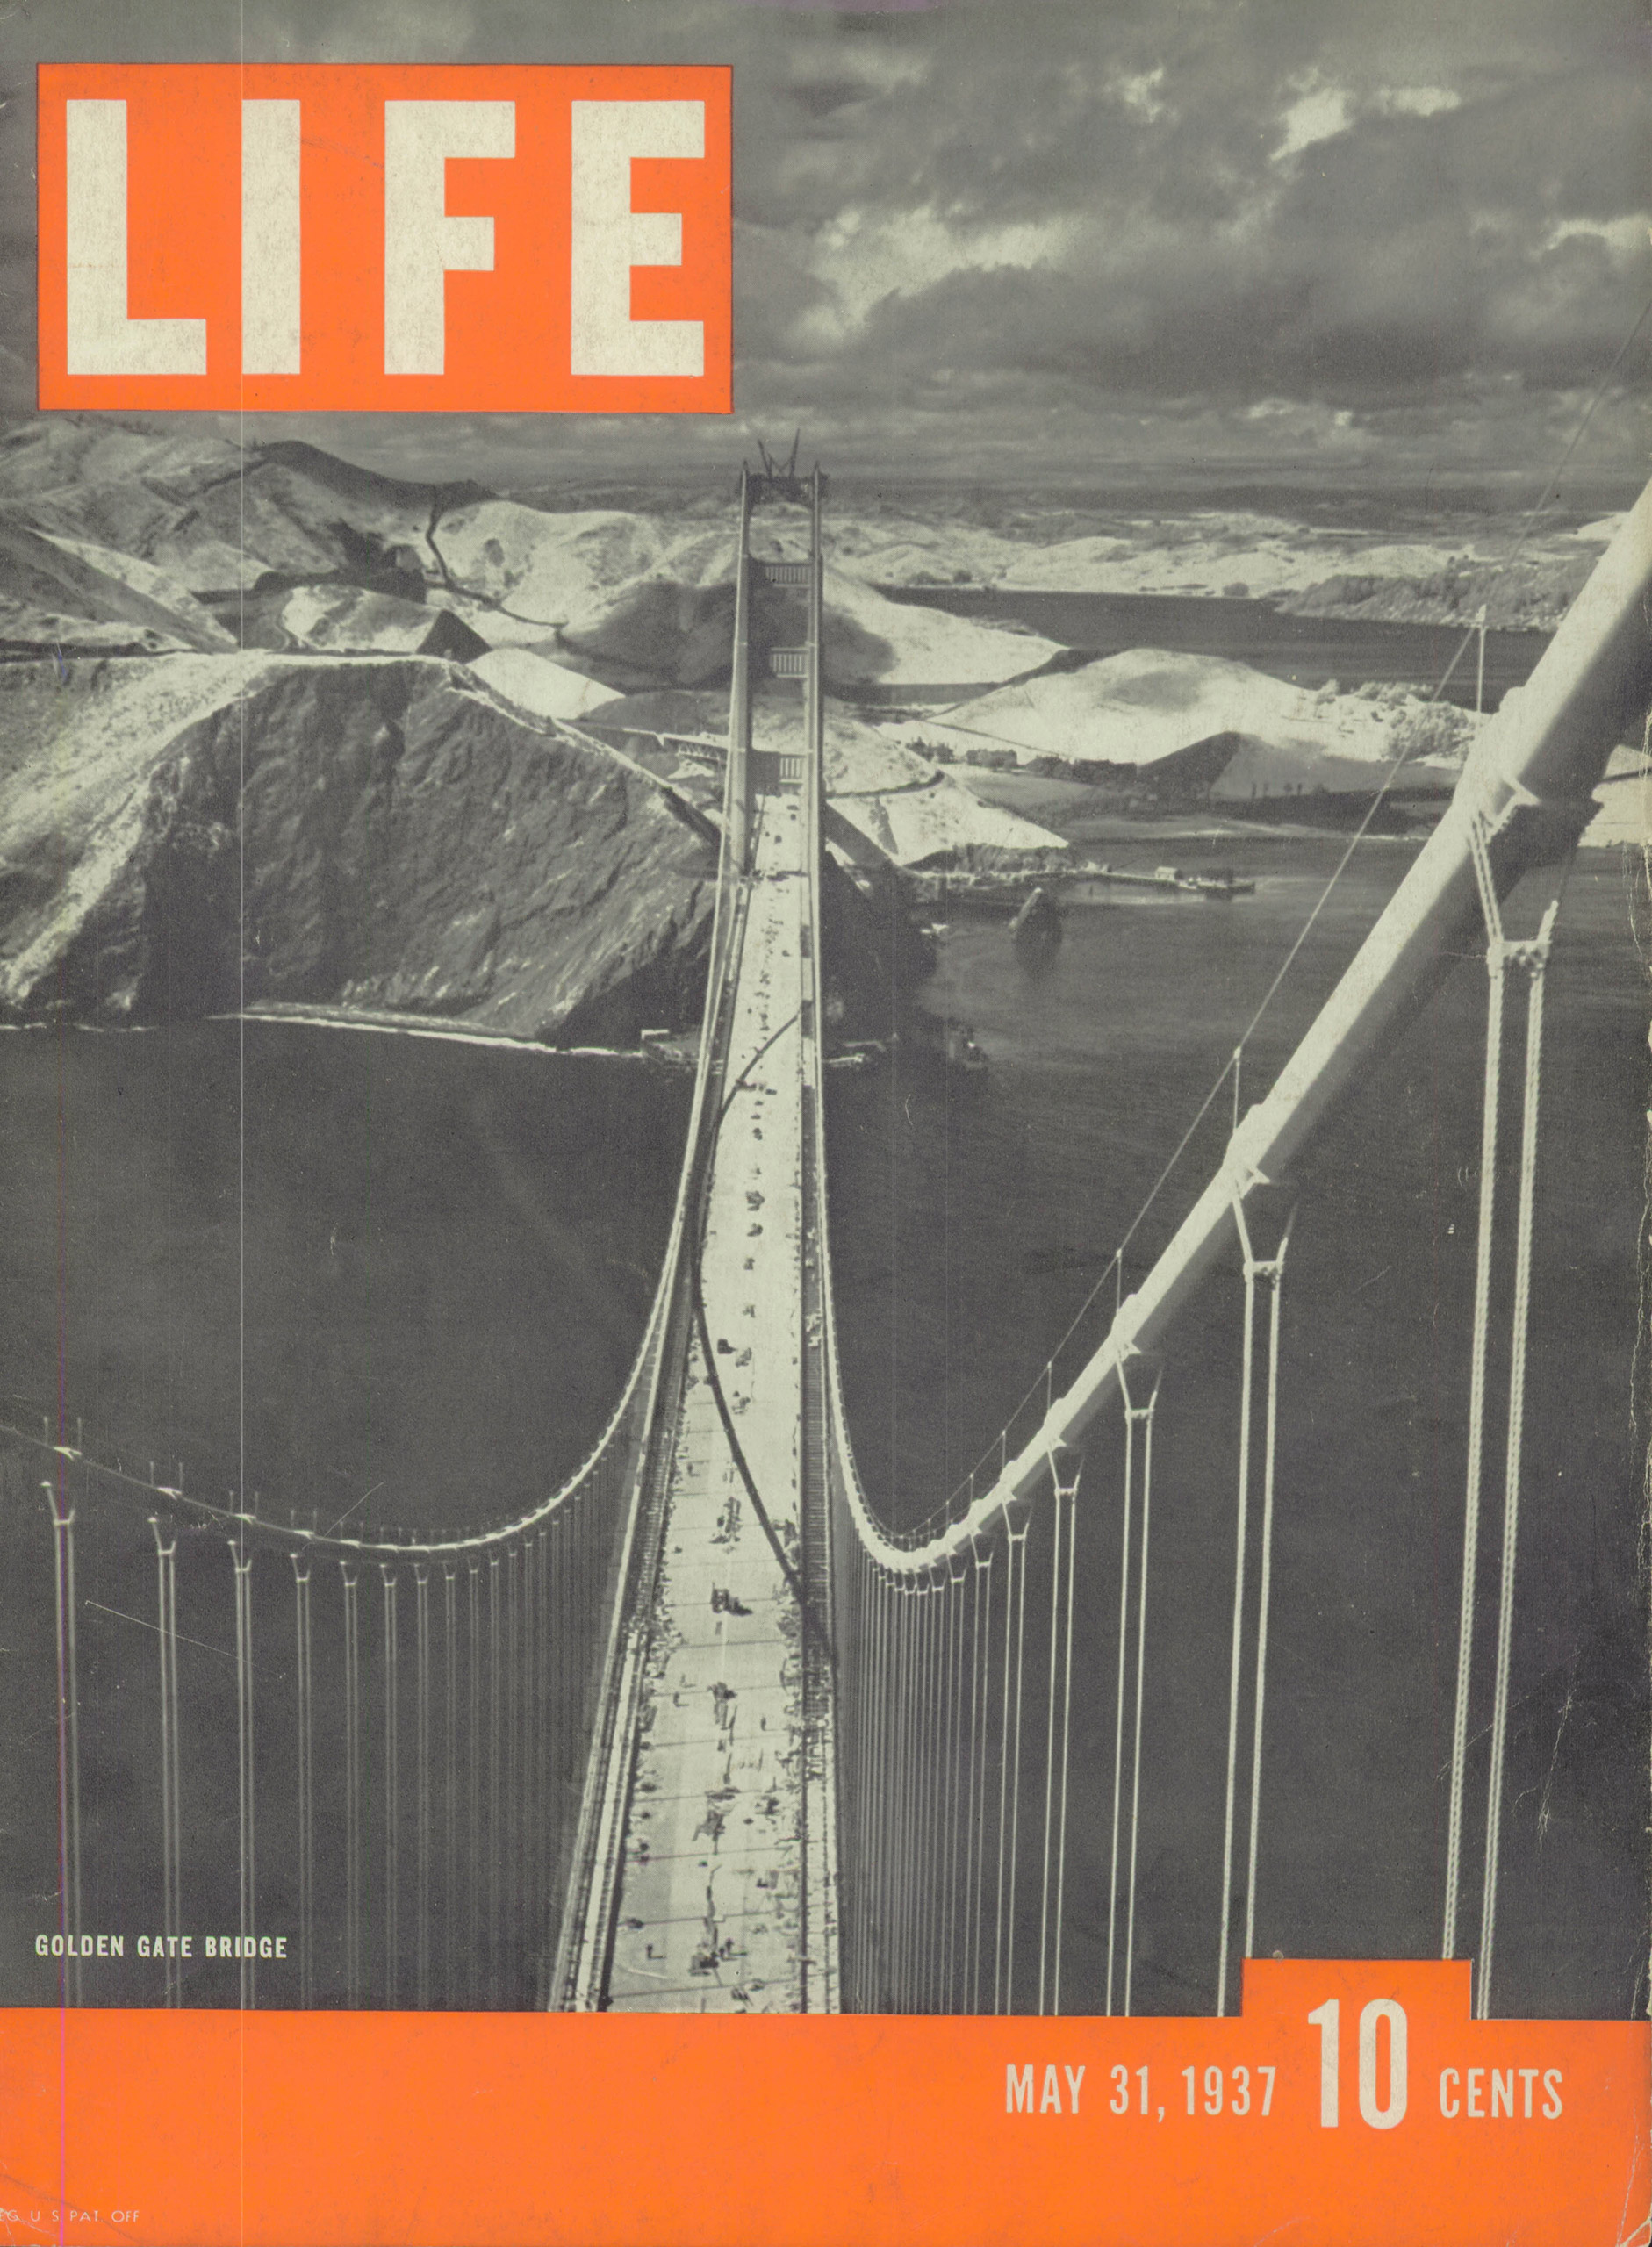 May 31, 1937 cover of LIFE magazine.